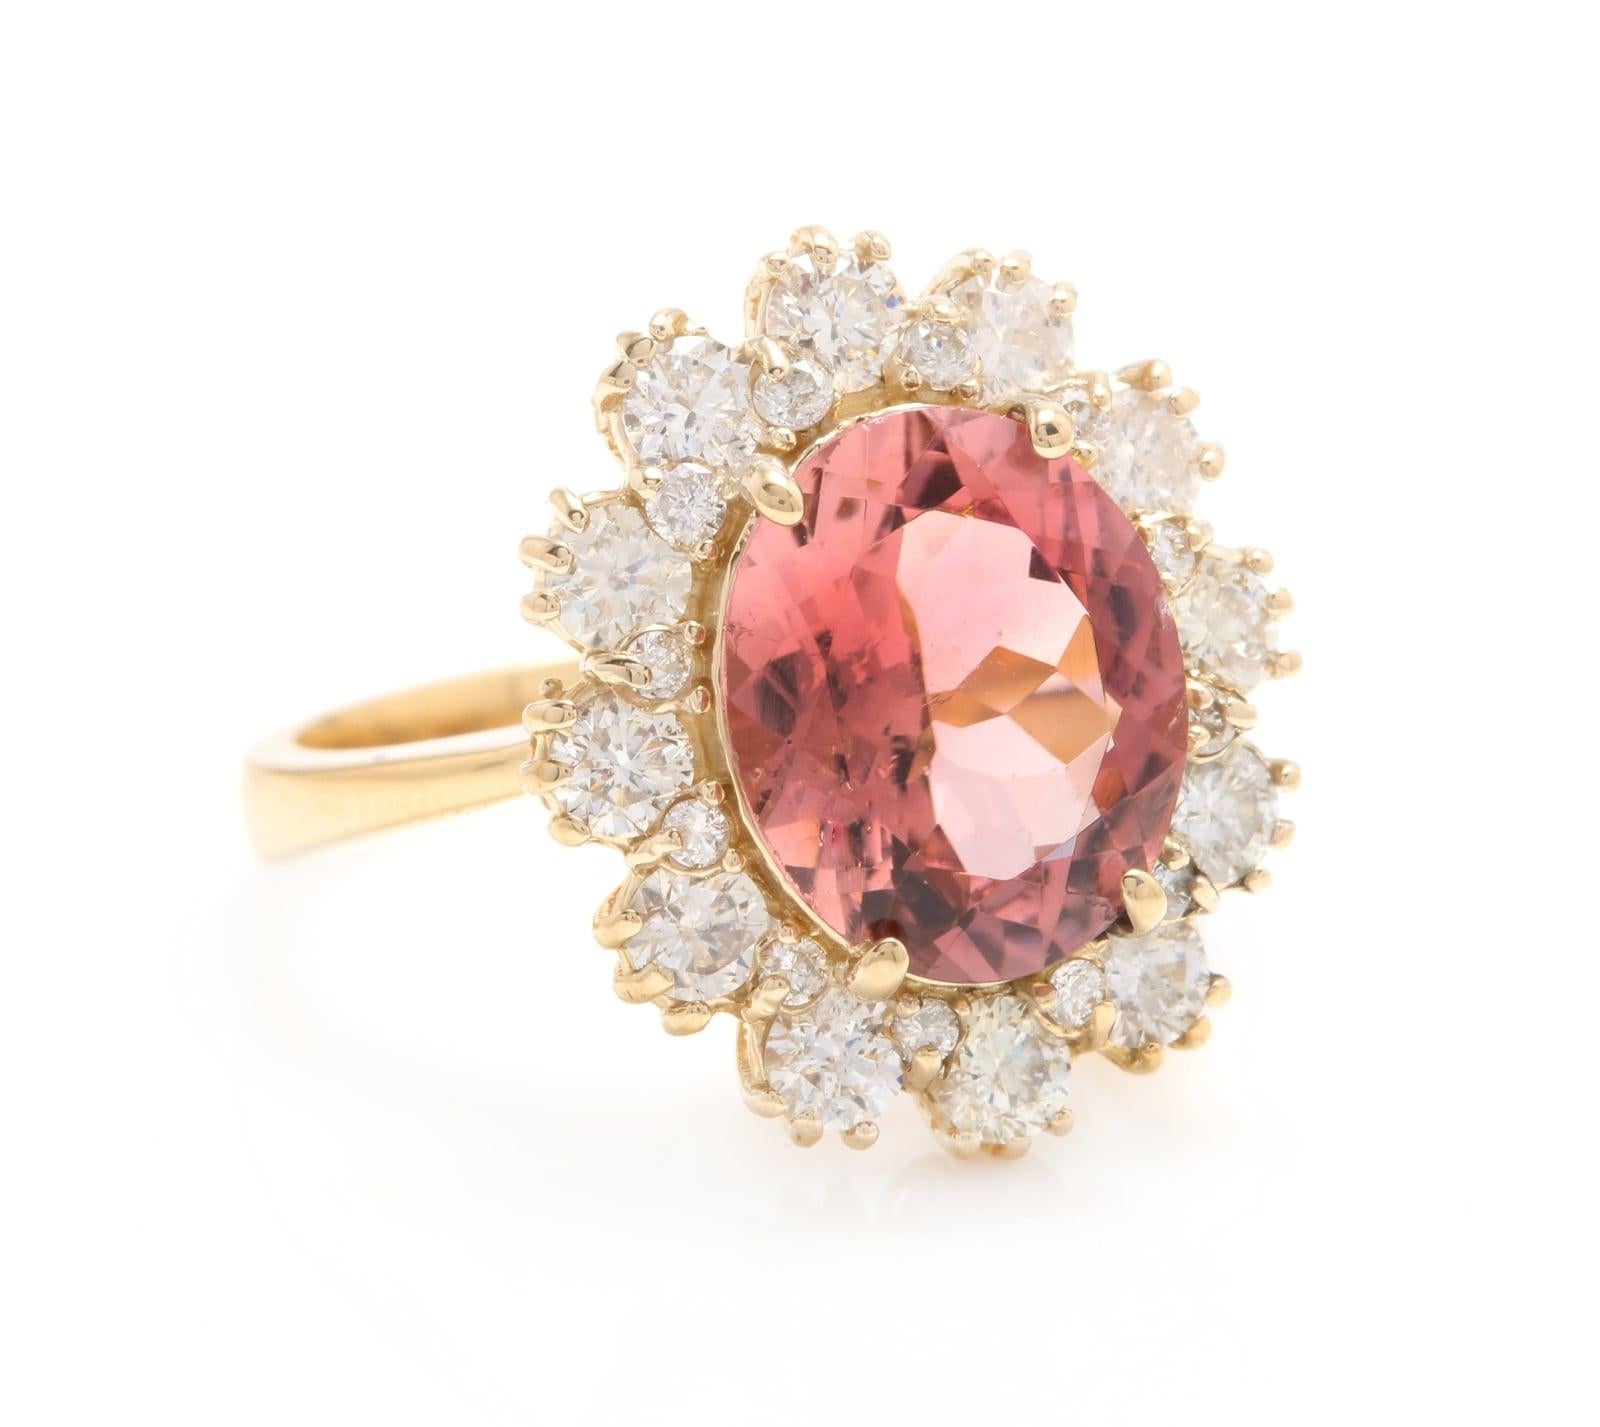 6.20 Carats Natural Very Nice Looking Tourmaline and Diamond 14K Solid Yellow Gold Ring

Total Natural Oval Cut Tourmaline Weight is: Approx. 5.00 Carats (Treatment-Heat)

Tourmaline Measures: Approx. 11.00 x 9.00mm

Natural Round Diamonds Weight: